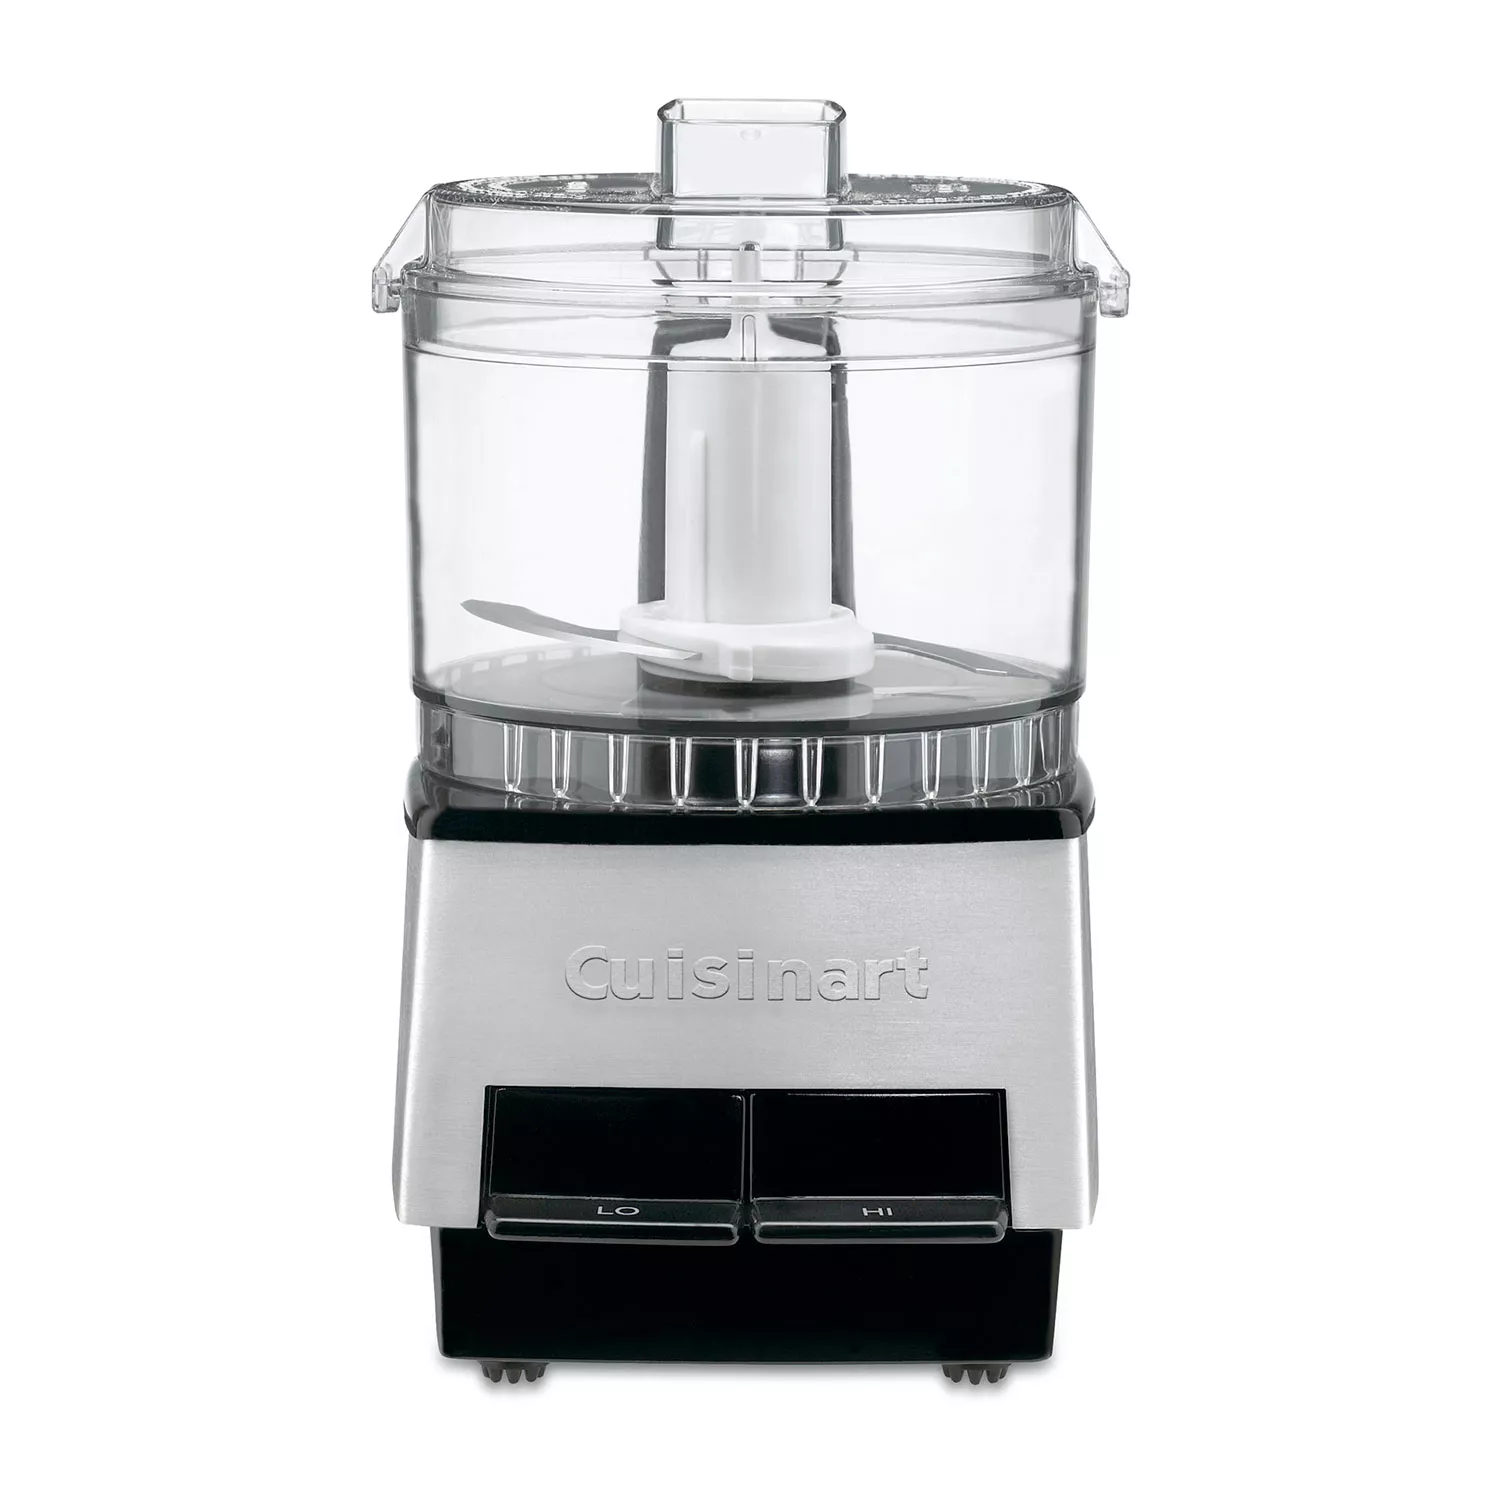 Cuisinart Brushed Stainless Series Processor, Mini-Prep